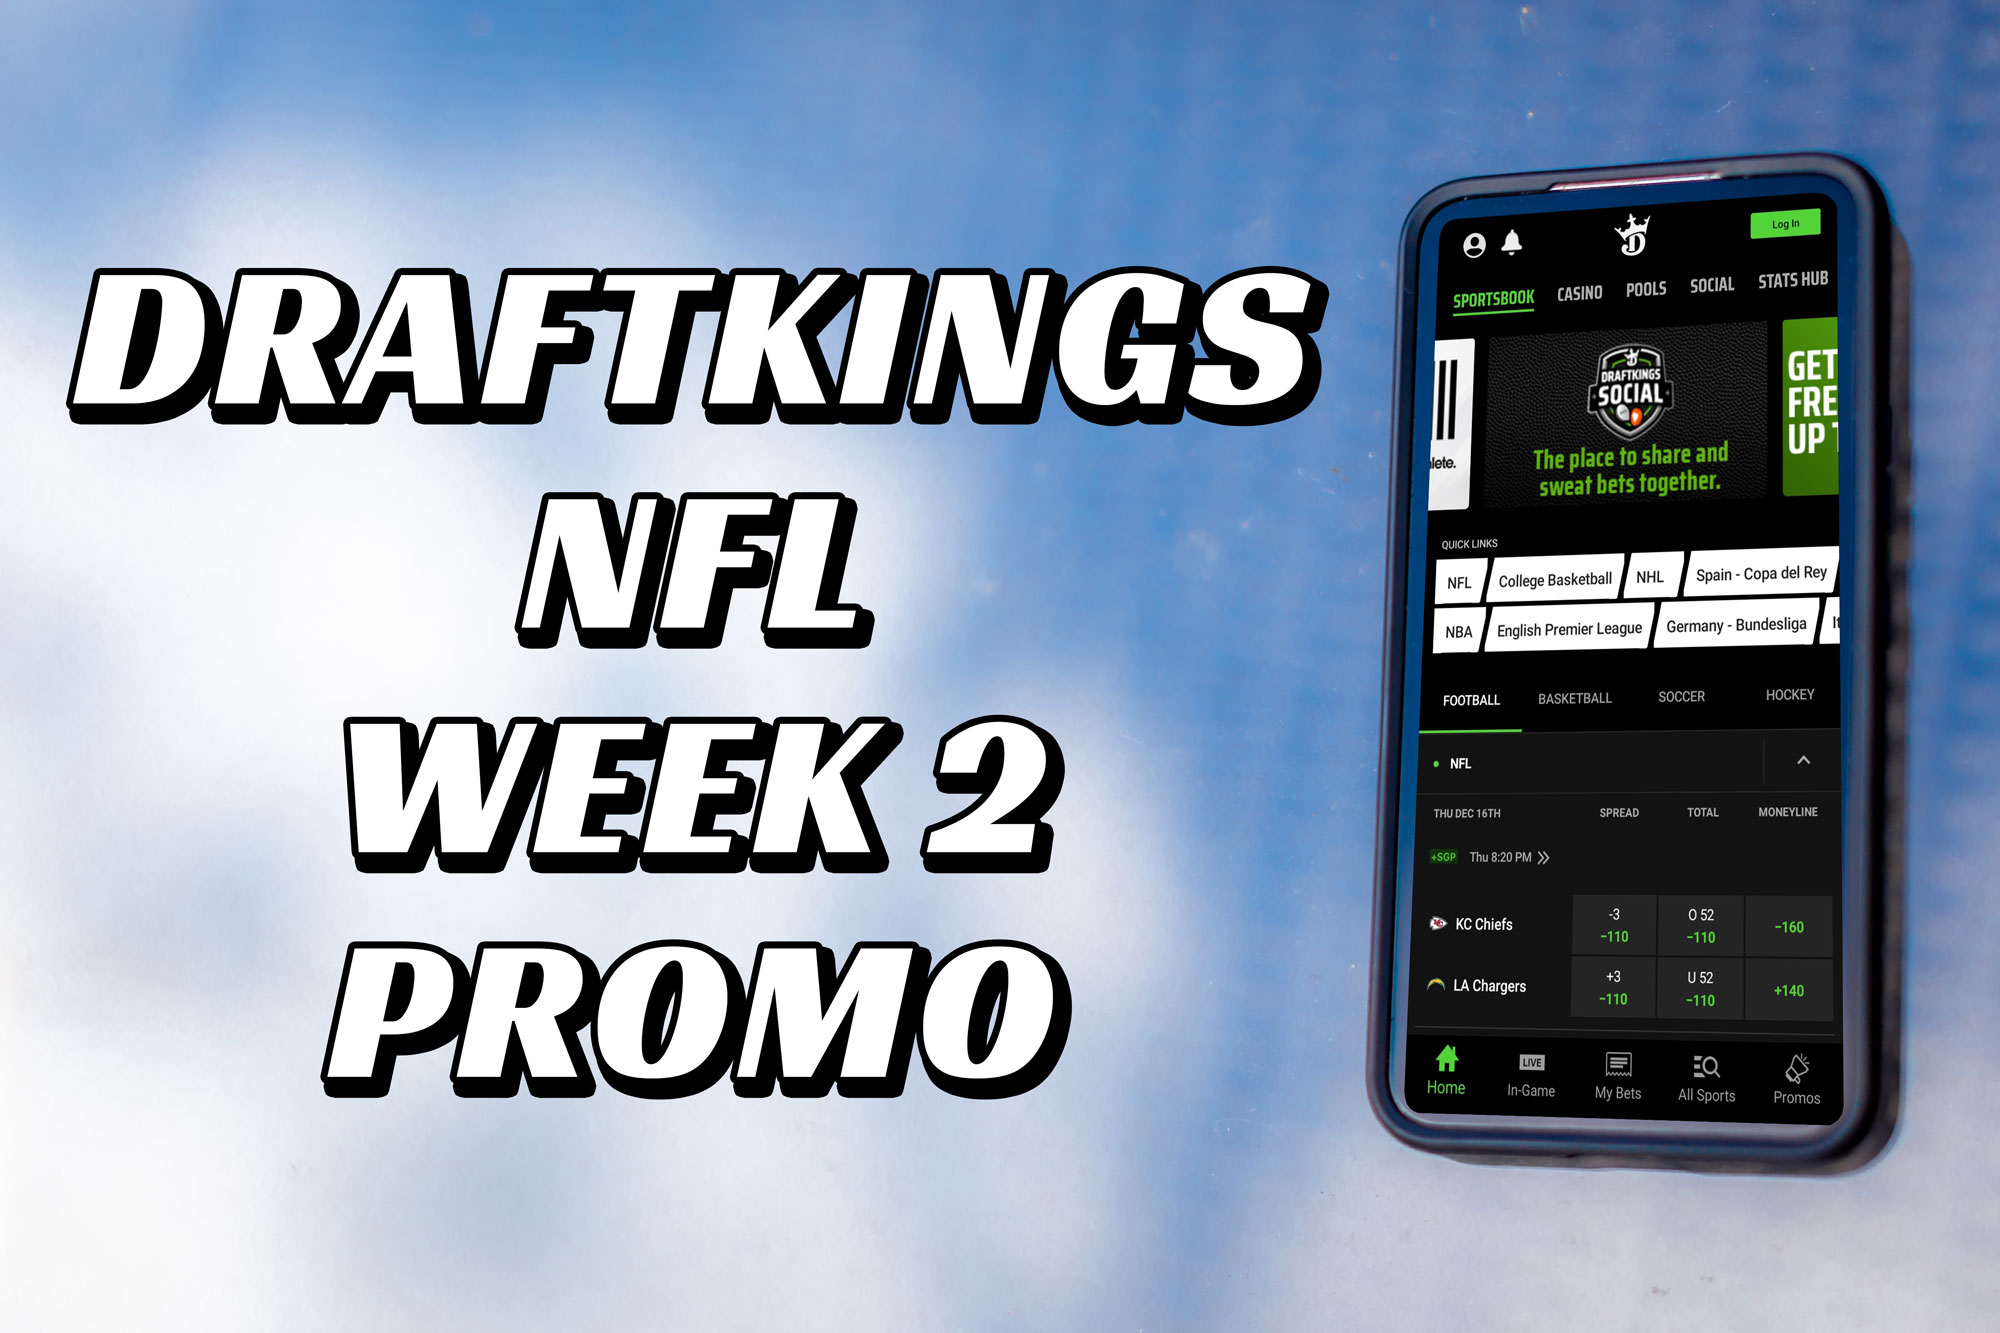 Seahawks-Lions picks: Best player prop bets for Week 2 NFL matchup -  DraftKings Network